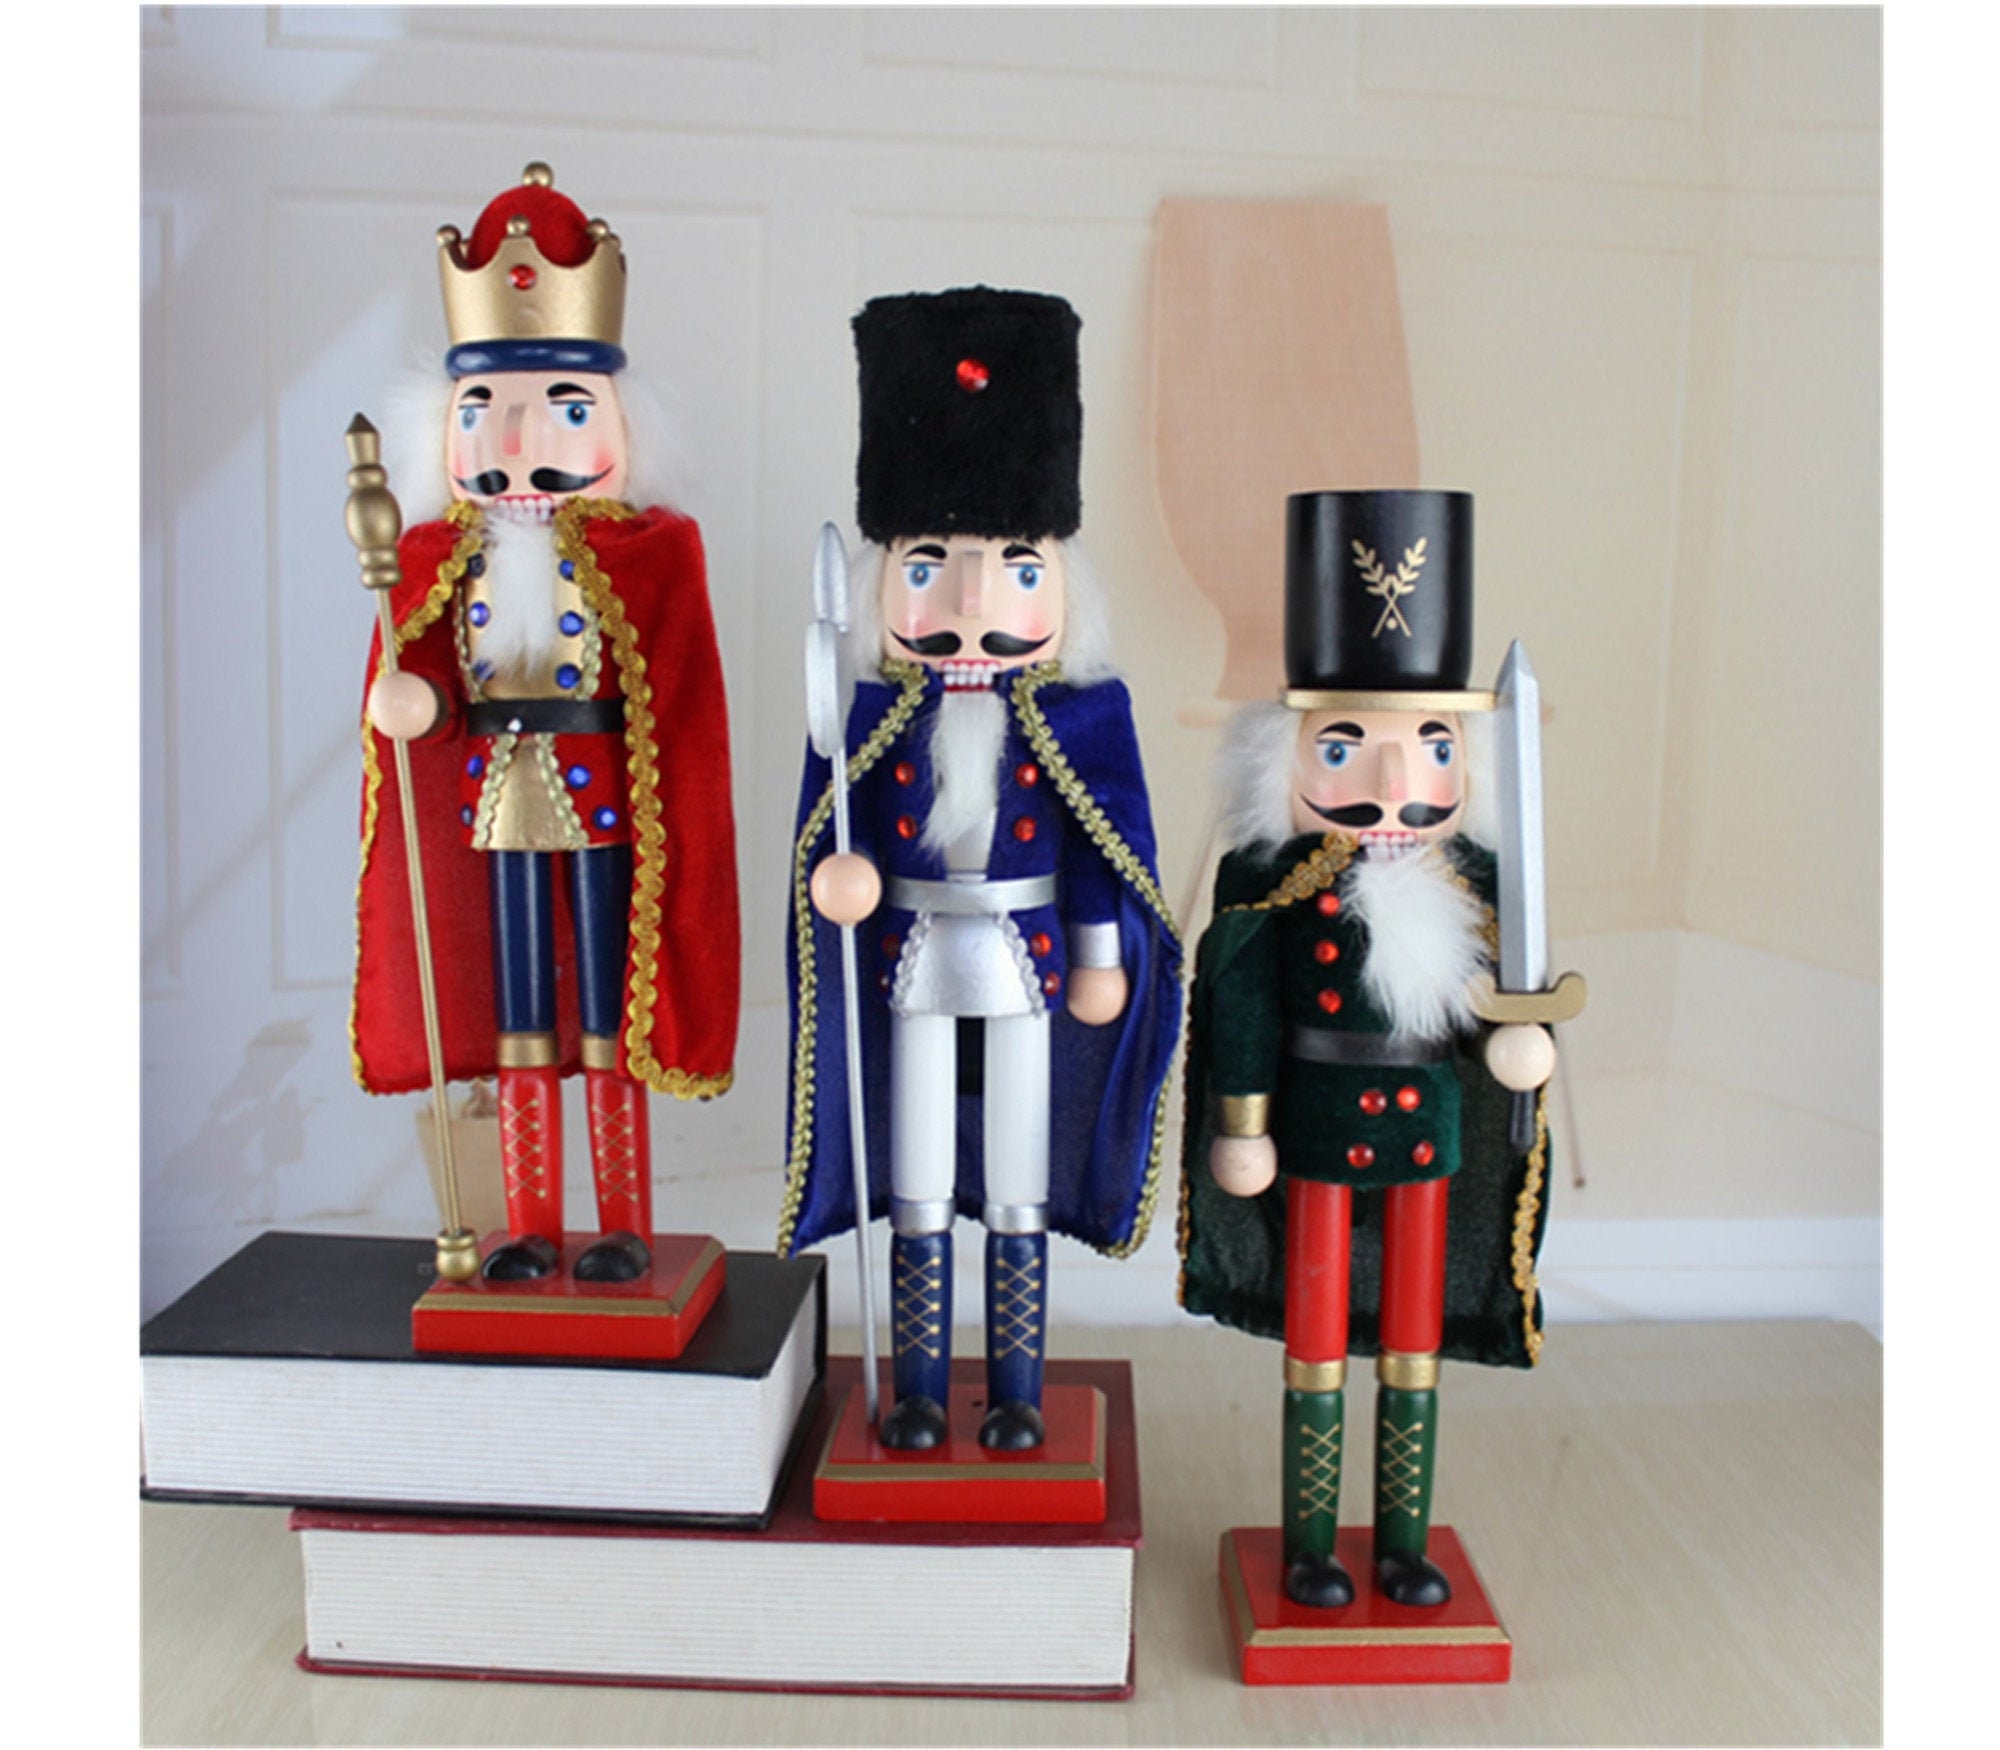 38cm Wooden Nutcracker 15＂Nutcracker Figurines Puppet Christmas Gift Collection Nut Crackers Wooden Toy Figure Wedding Party